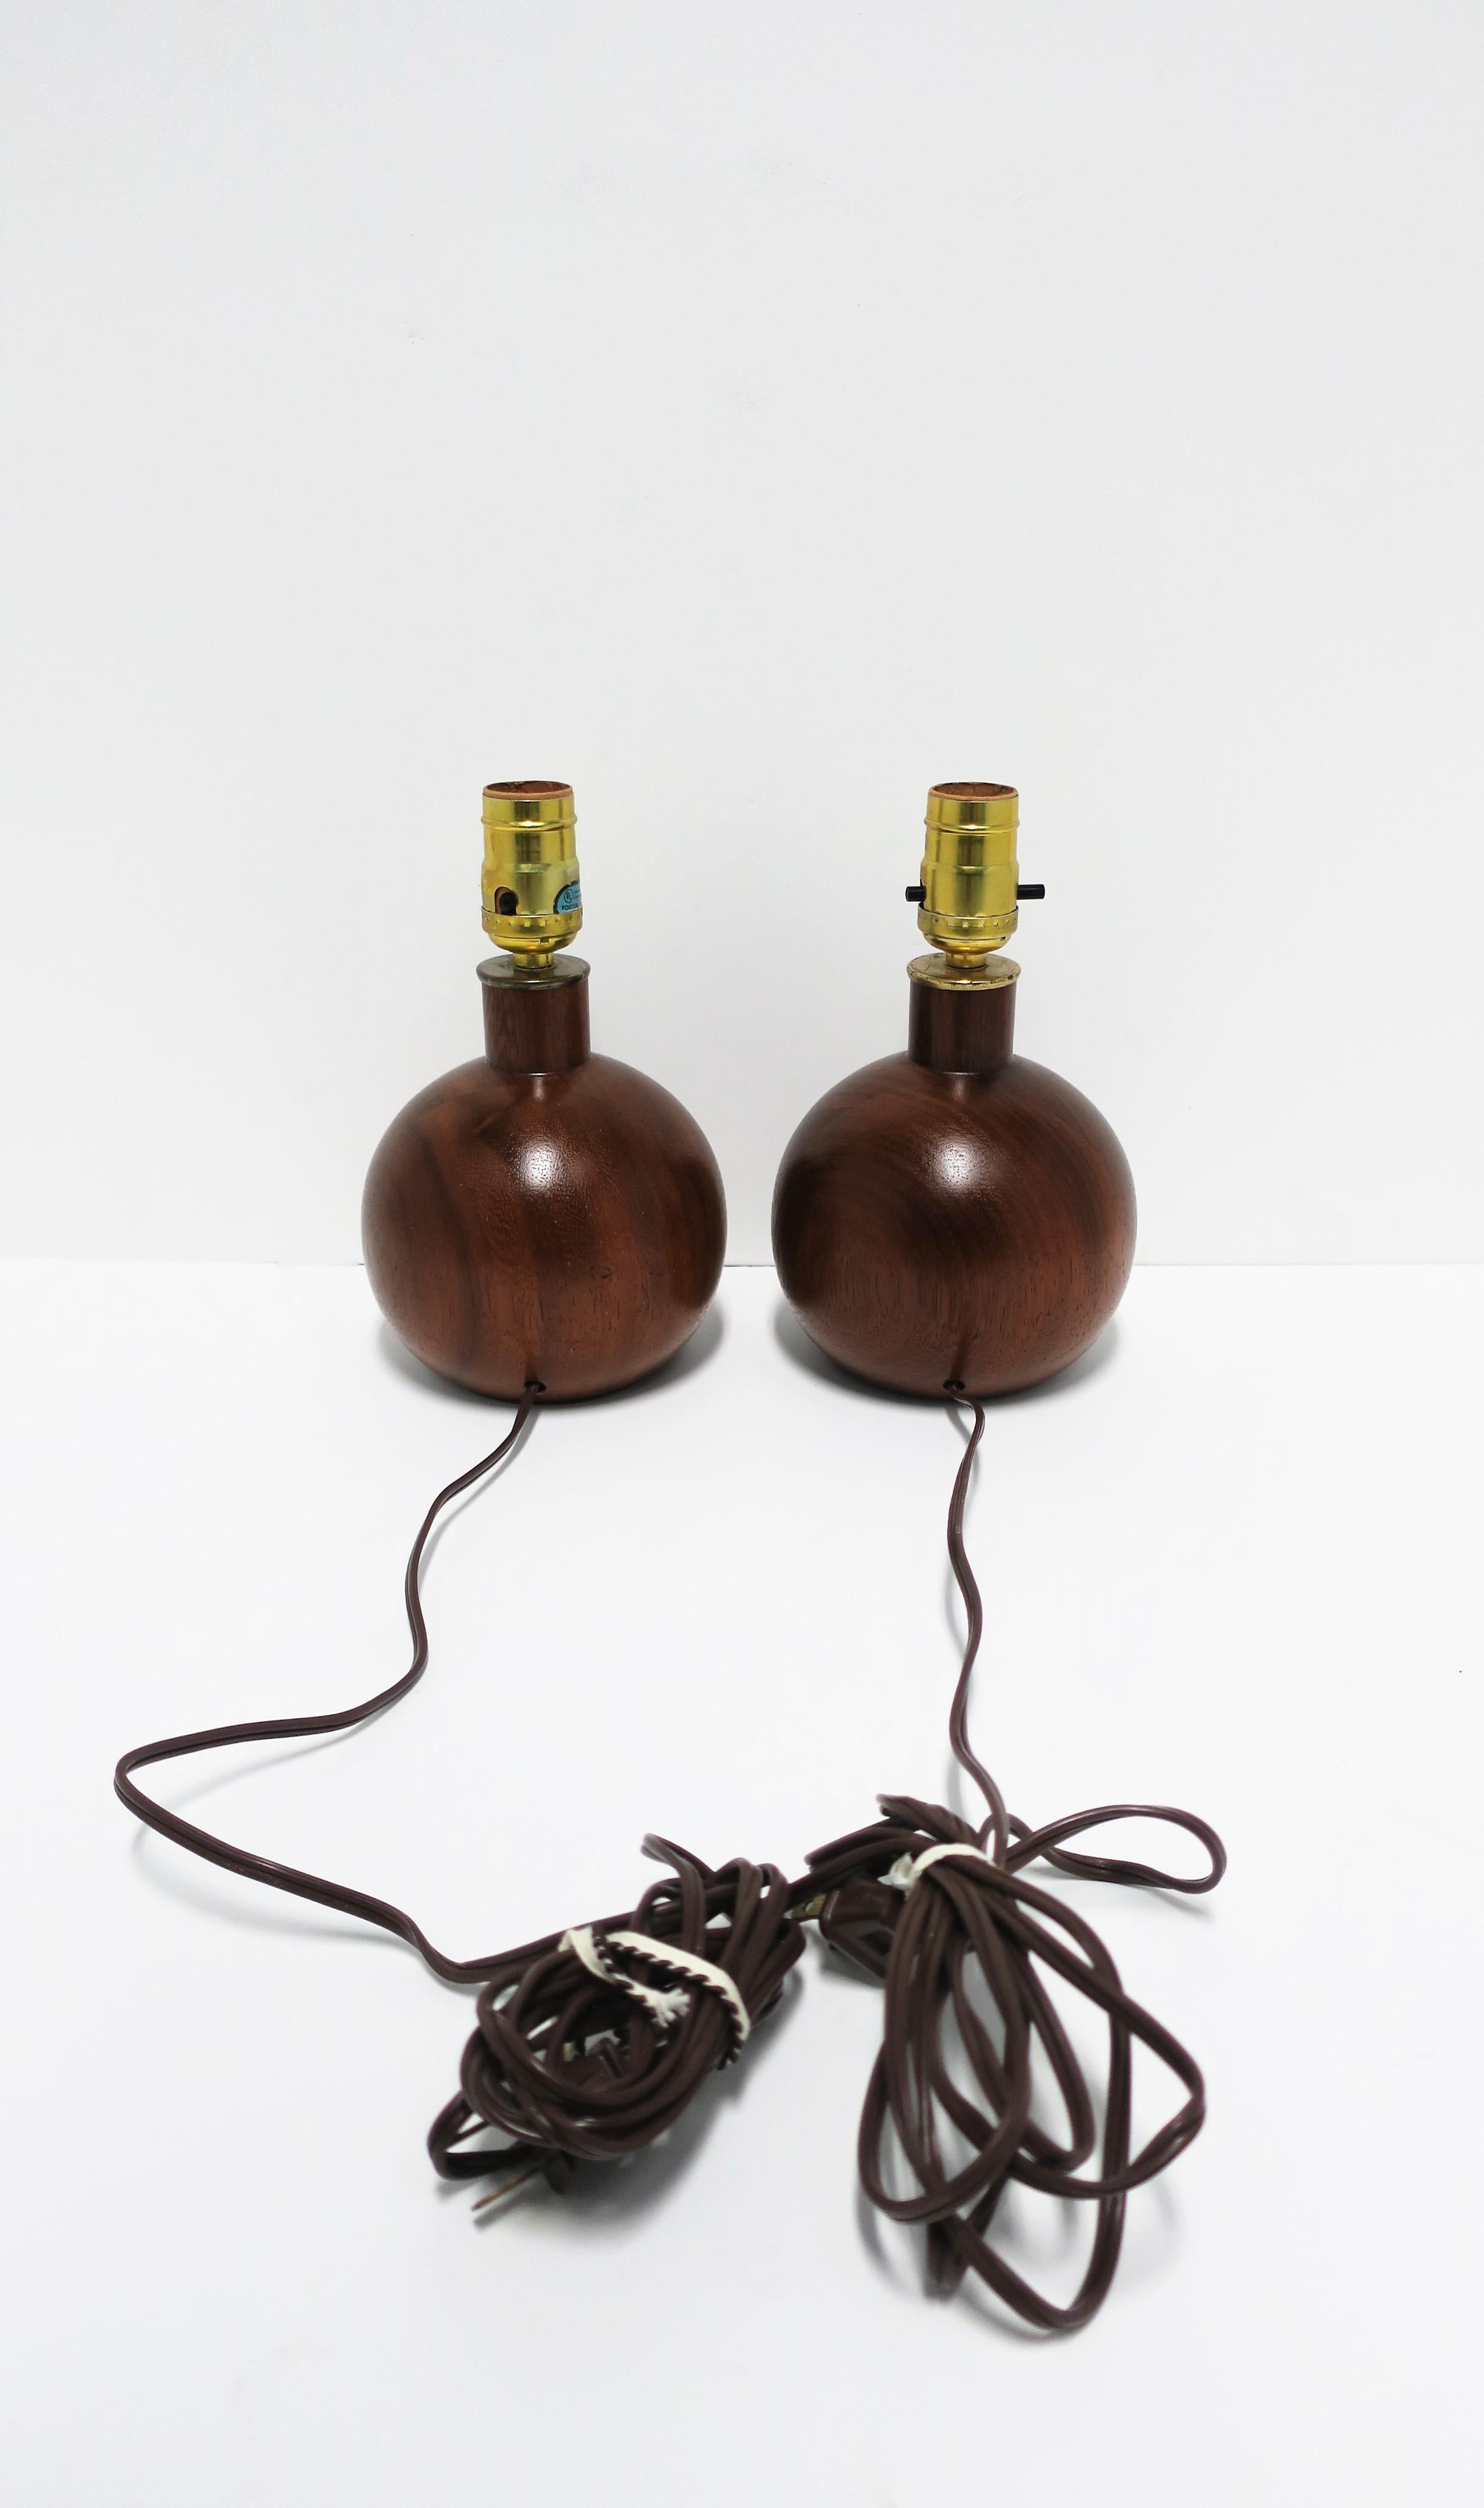 Modern Wood and Brass Round Ball Sphere Desk or Table Lamps 10